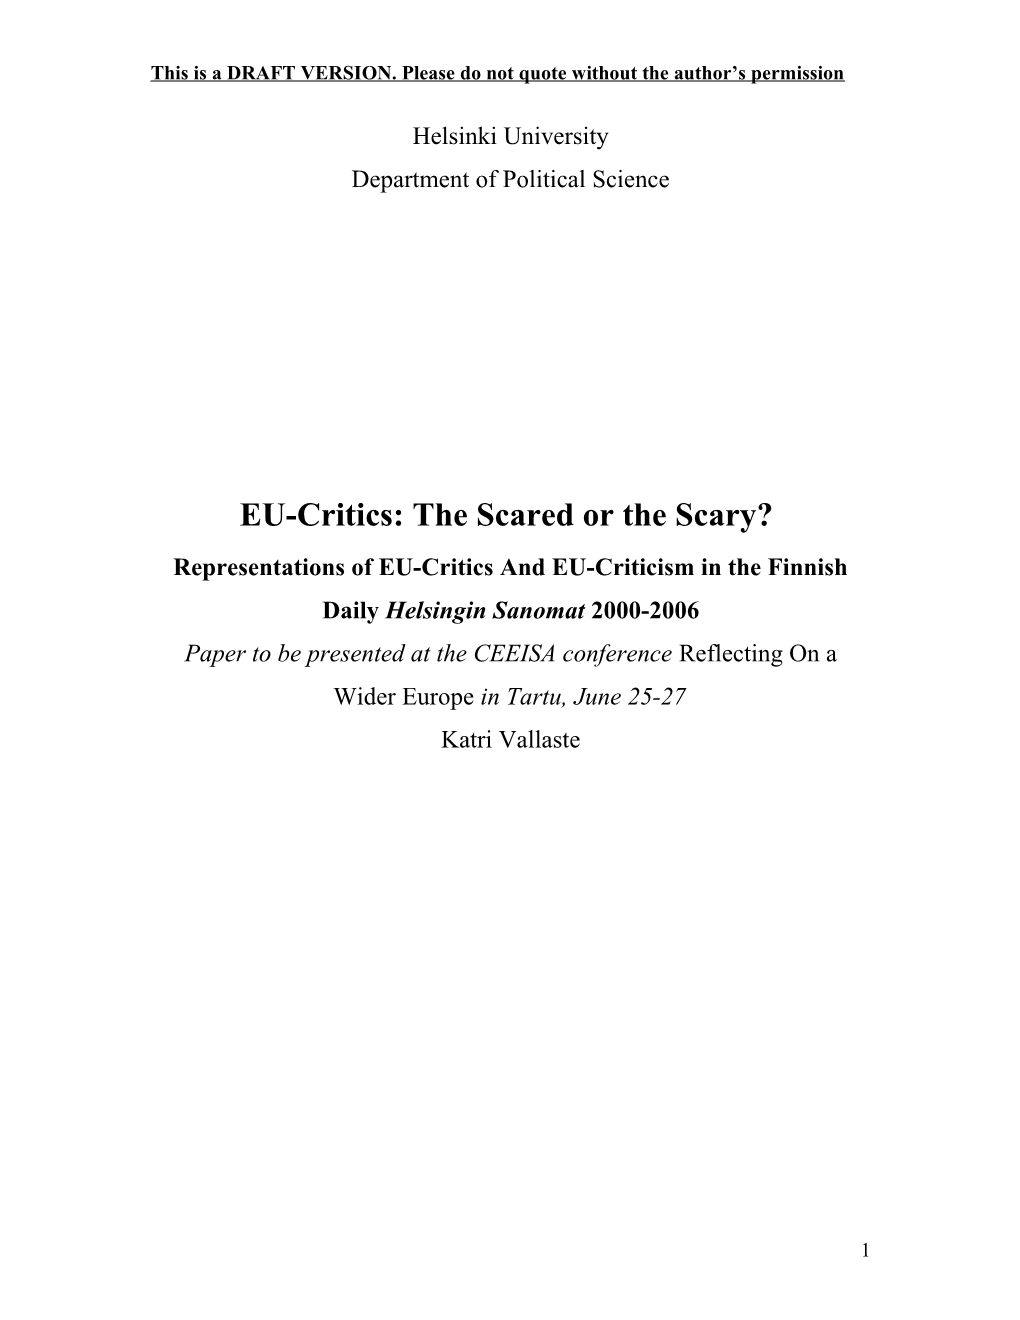 EU-Critics Are Characterized in Terms of Their Relations with the Elites